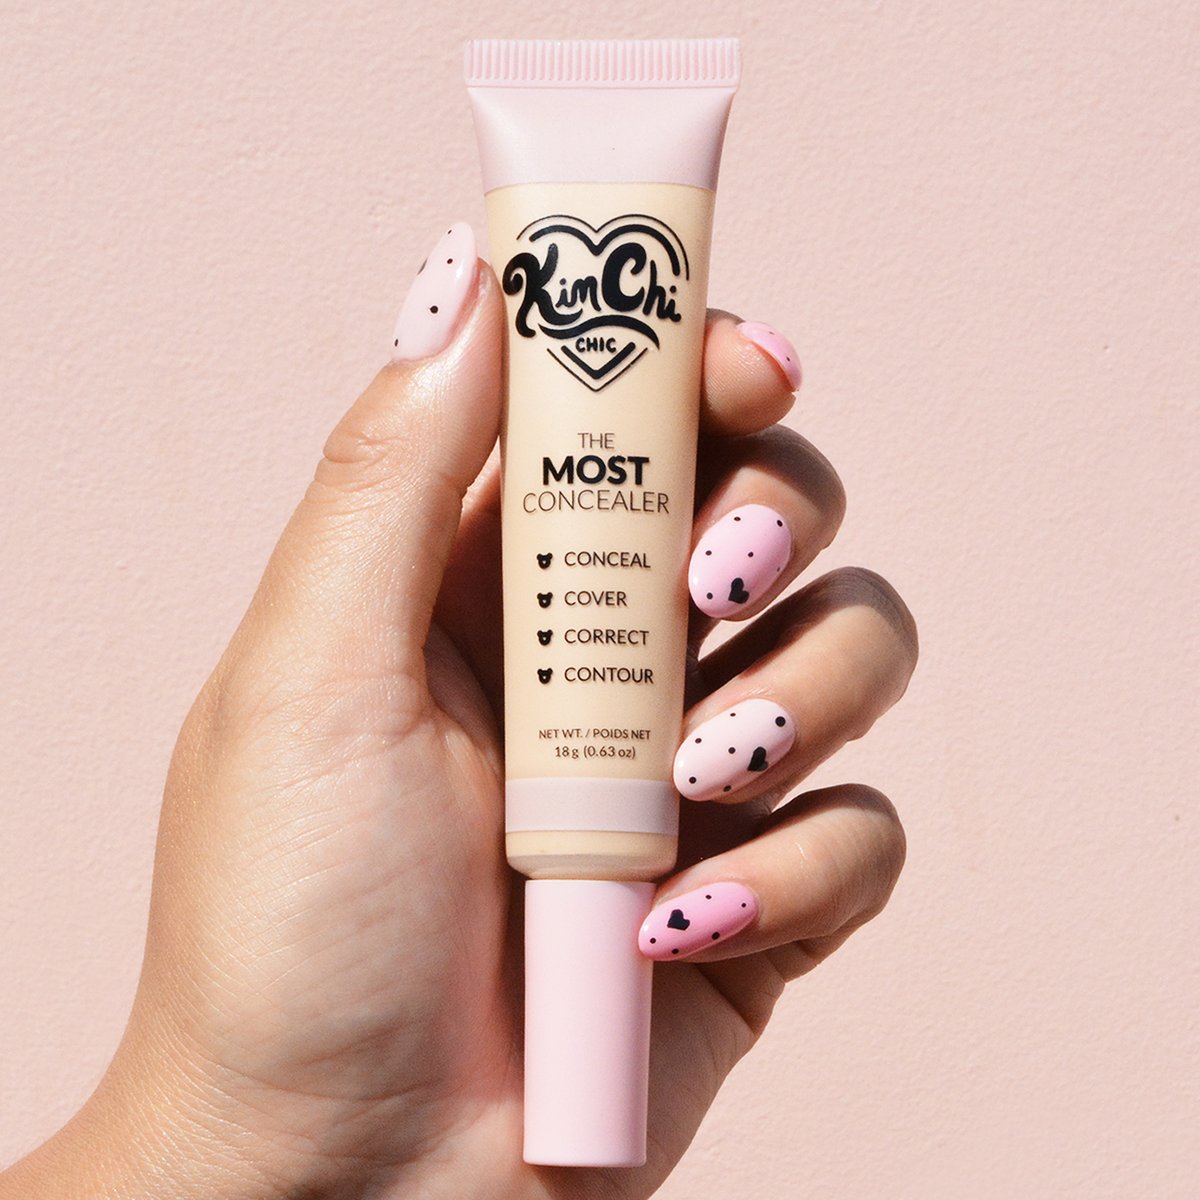 THE MOST CONCEALER